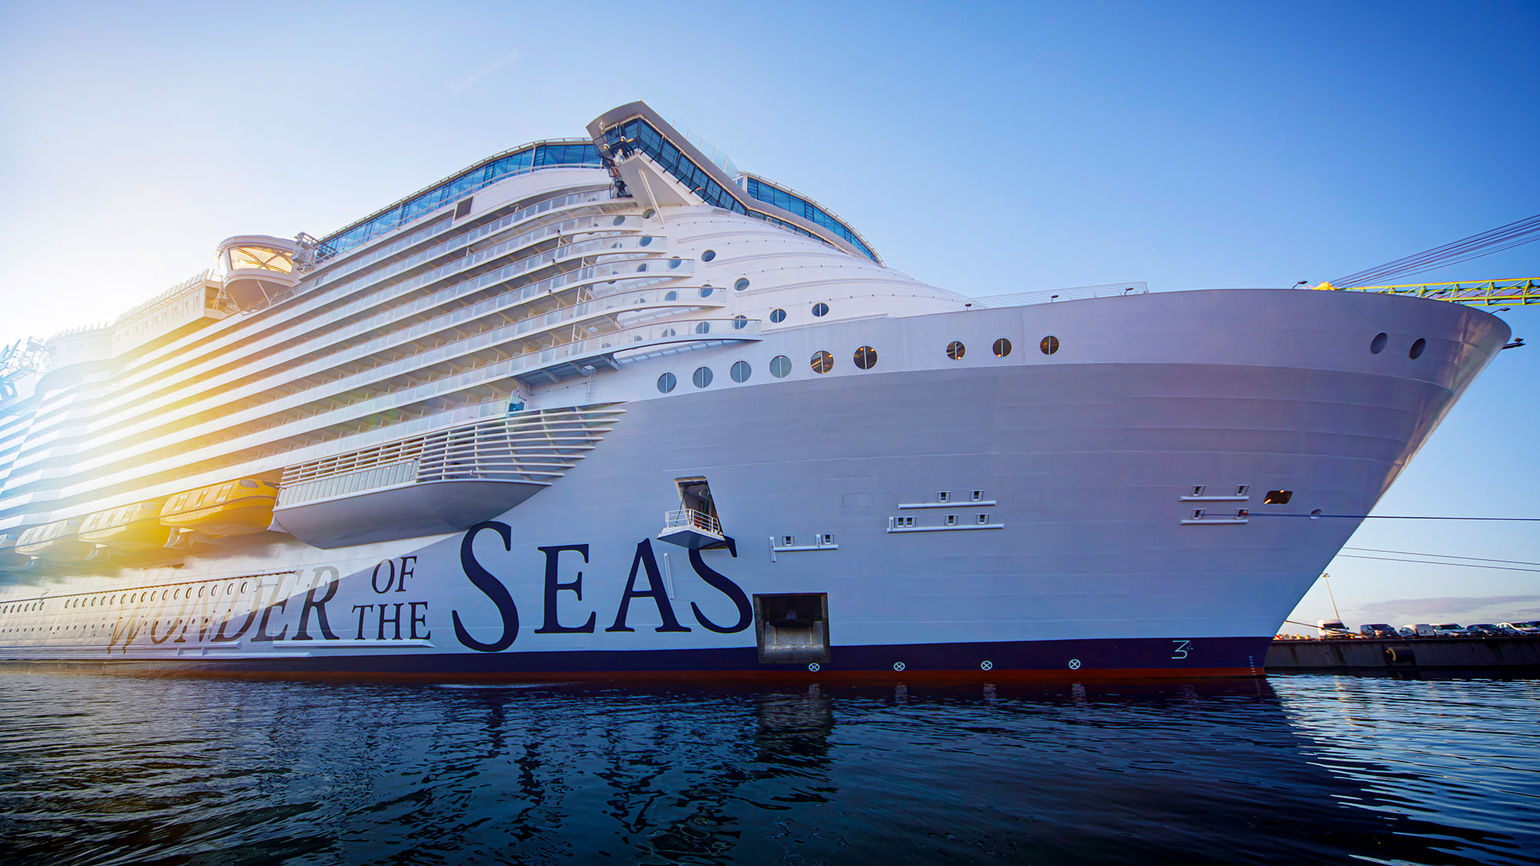 Wonder of the Seas delivered to Royal Caribbean